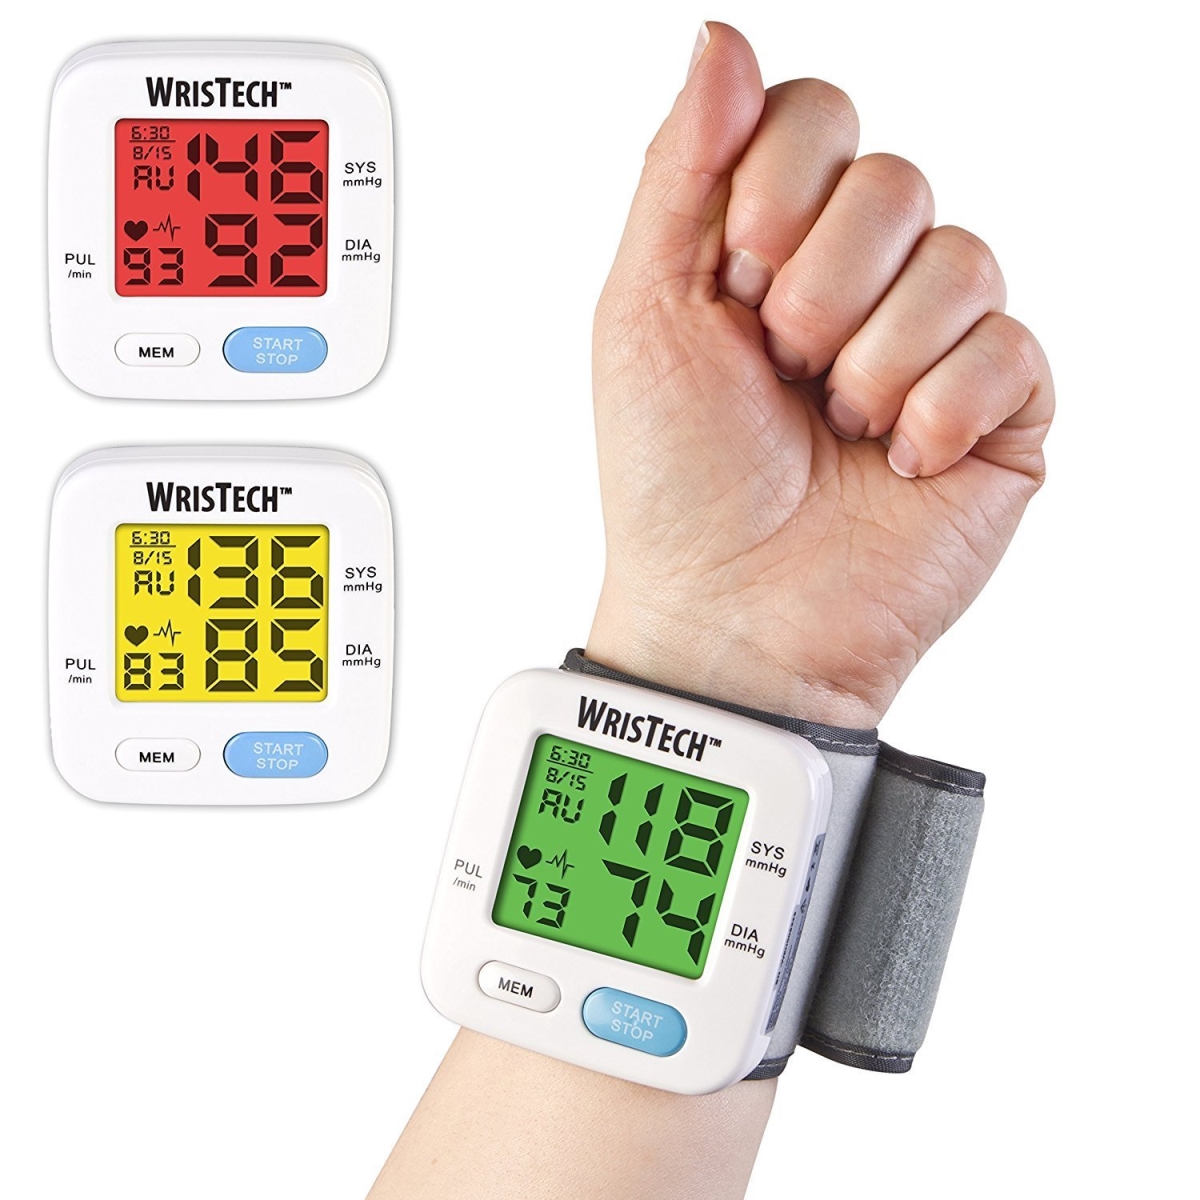 Jb7608 Wristech Blood Pressure Monitor With Adjustable Wrist Cuff Color Changing Lcd Monitor